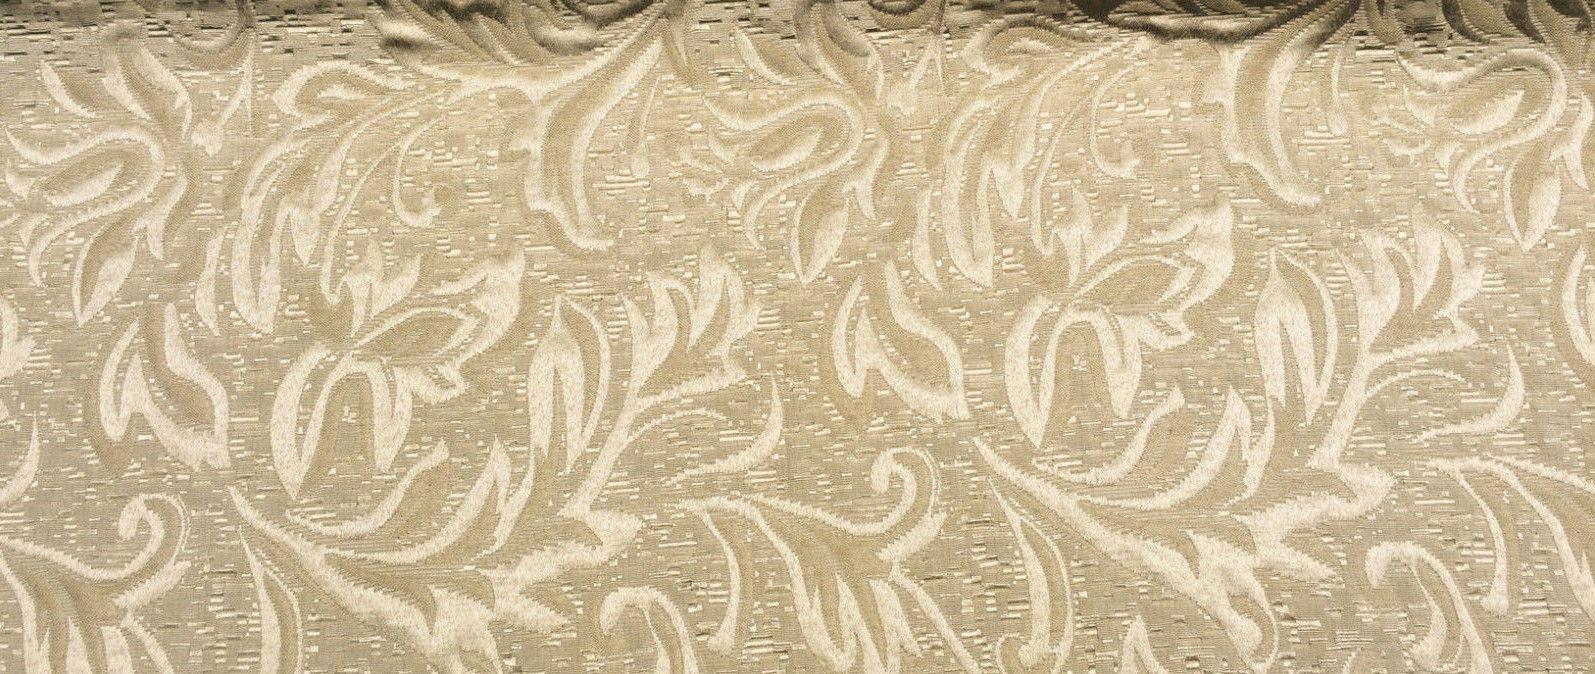 40 yds Satin Fabric Roll - Gold-Antique